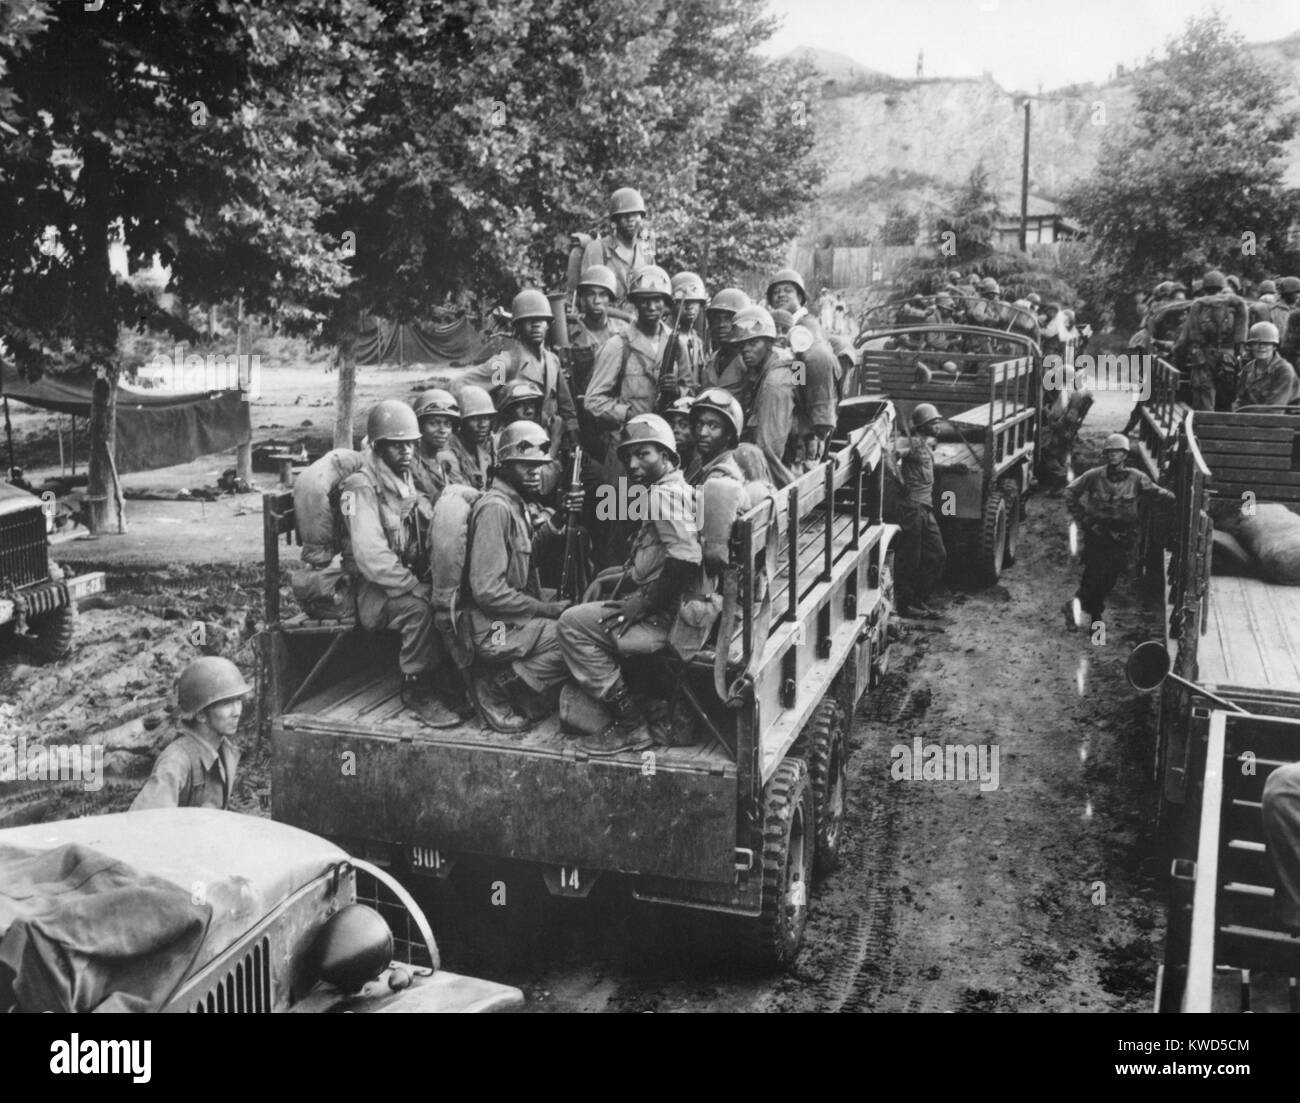 U.S. Soldiers move up to the firing line in Korea on July 18, 1950. Troops on occupation duty in Japan were the first fight the North Korean invaders. African Americans in the near truck are with the now integrated 24th Infantry Regiment. Korean War, 1950-53. (BSLOC 2014 11 8) Stock Photo